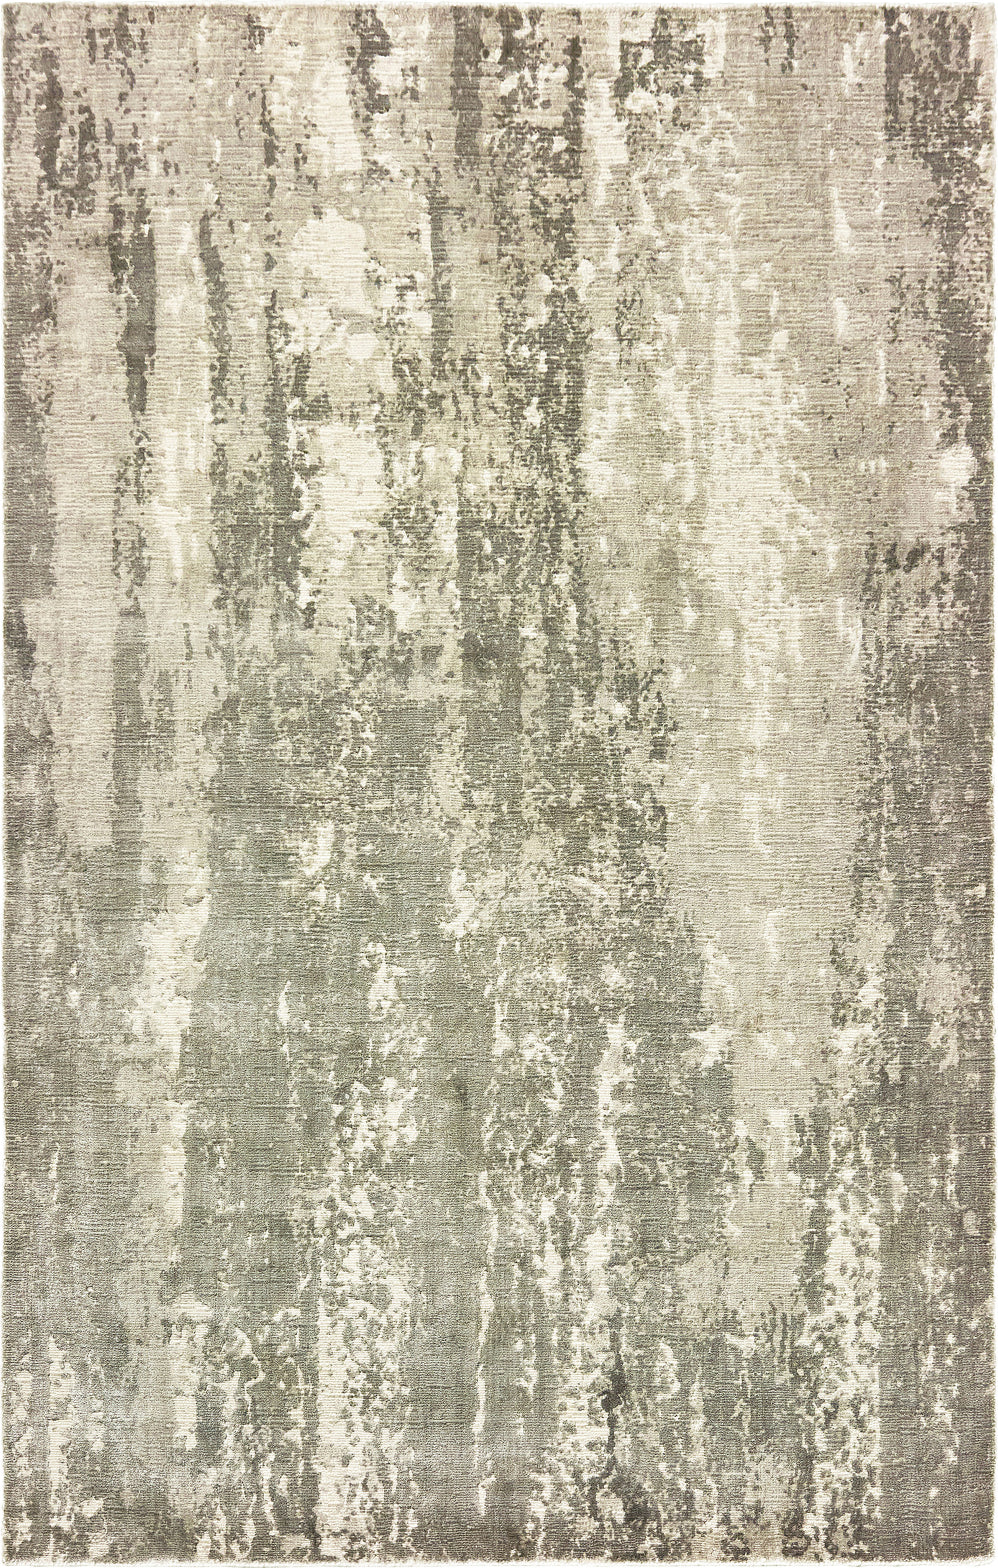 Oriental Weavers Formations 70006 Grey Ivory Area Rug main image featured